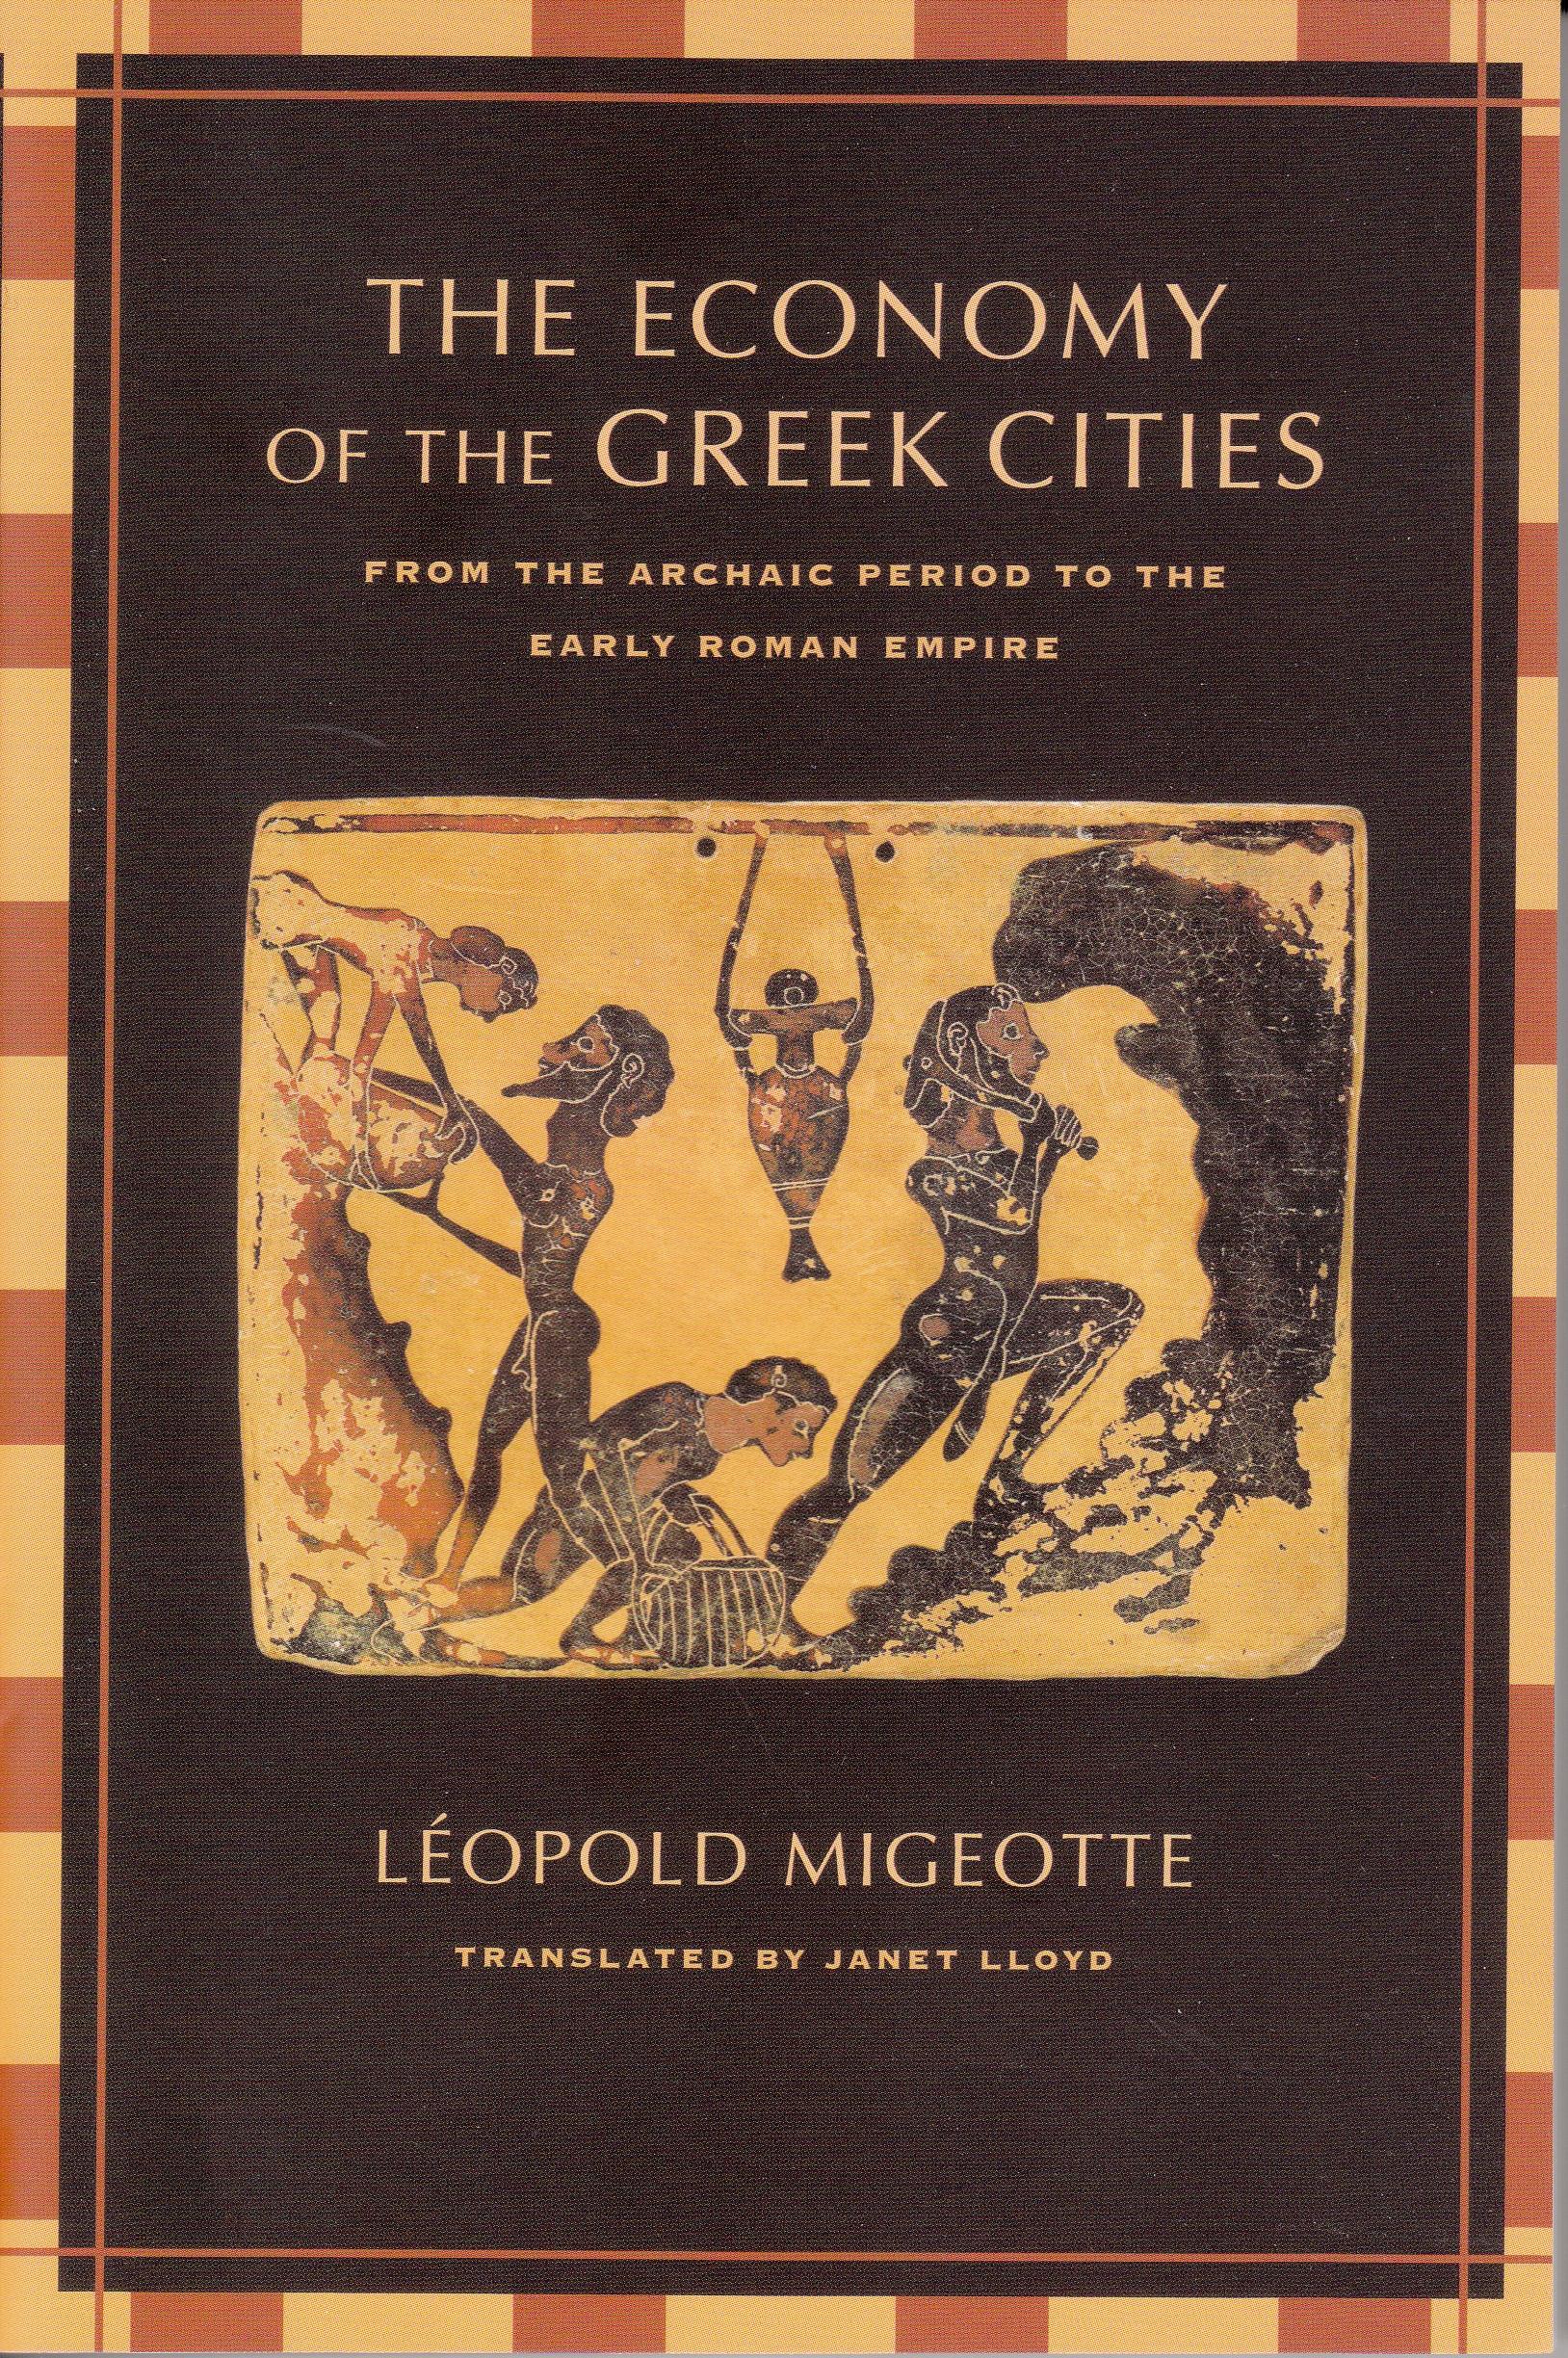 The Economy Of The Greek Cities "From The Archaic Period To The Early Roman Empire". From The Archaic Period To The Early Roman Empire